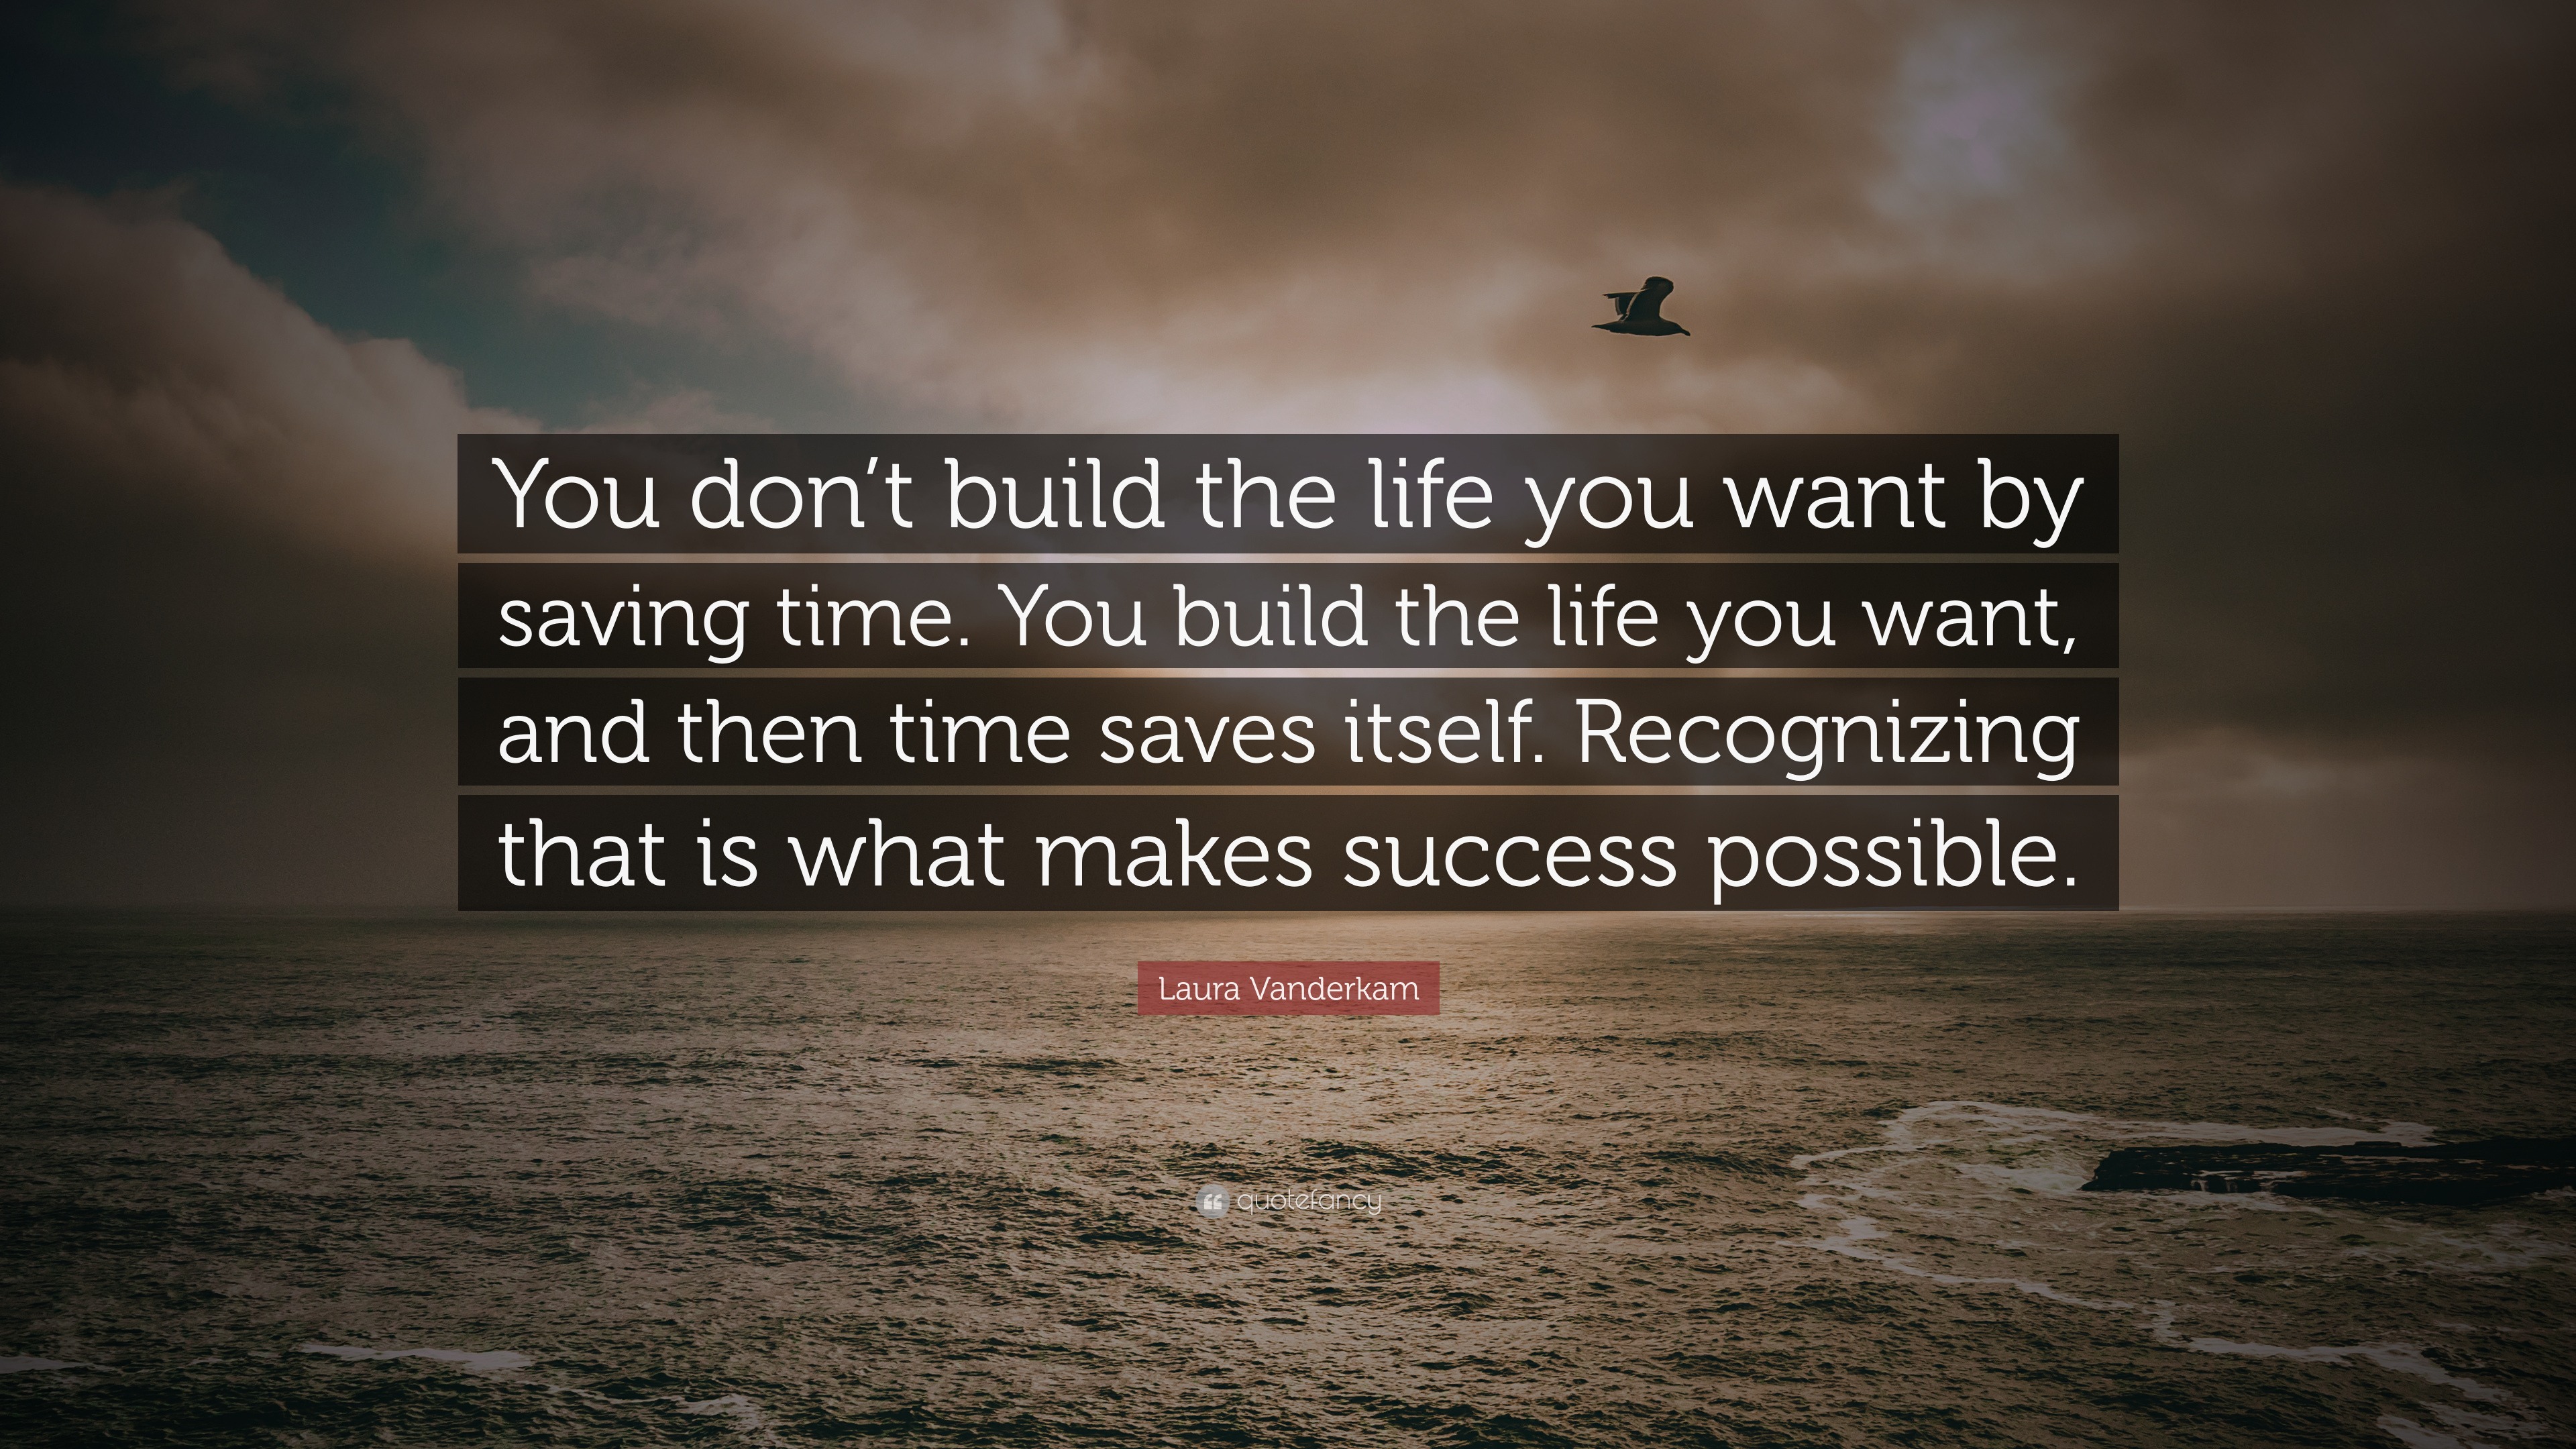 https://quotefancy.com/media/wallpaper/3840x2160/6445839-Laura-Vanderkam-Quote-You-don-t-build-the-life-you-want-by-saving.jpg